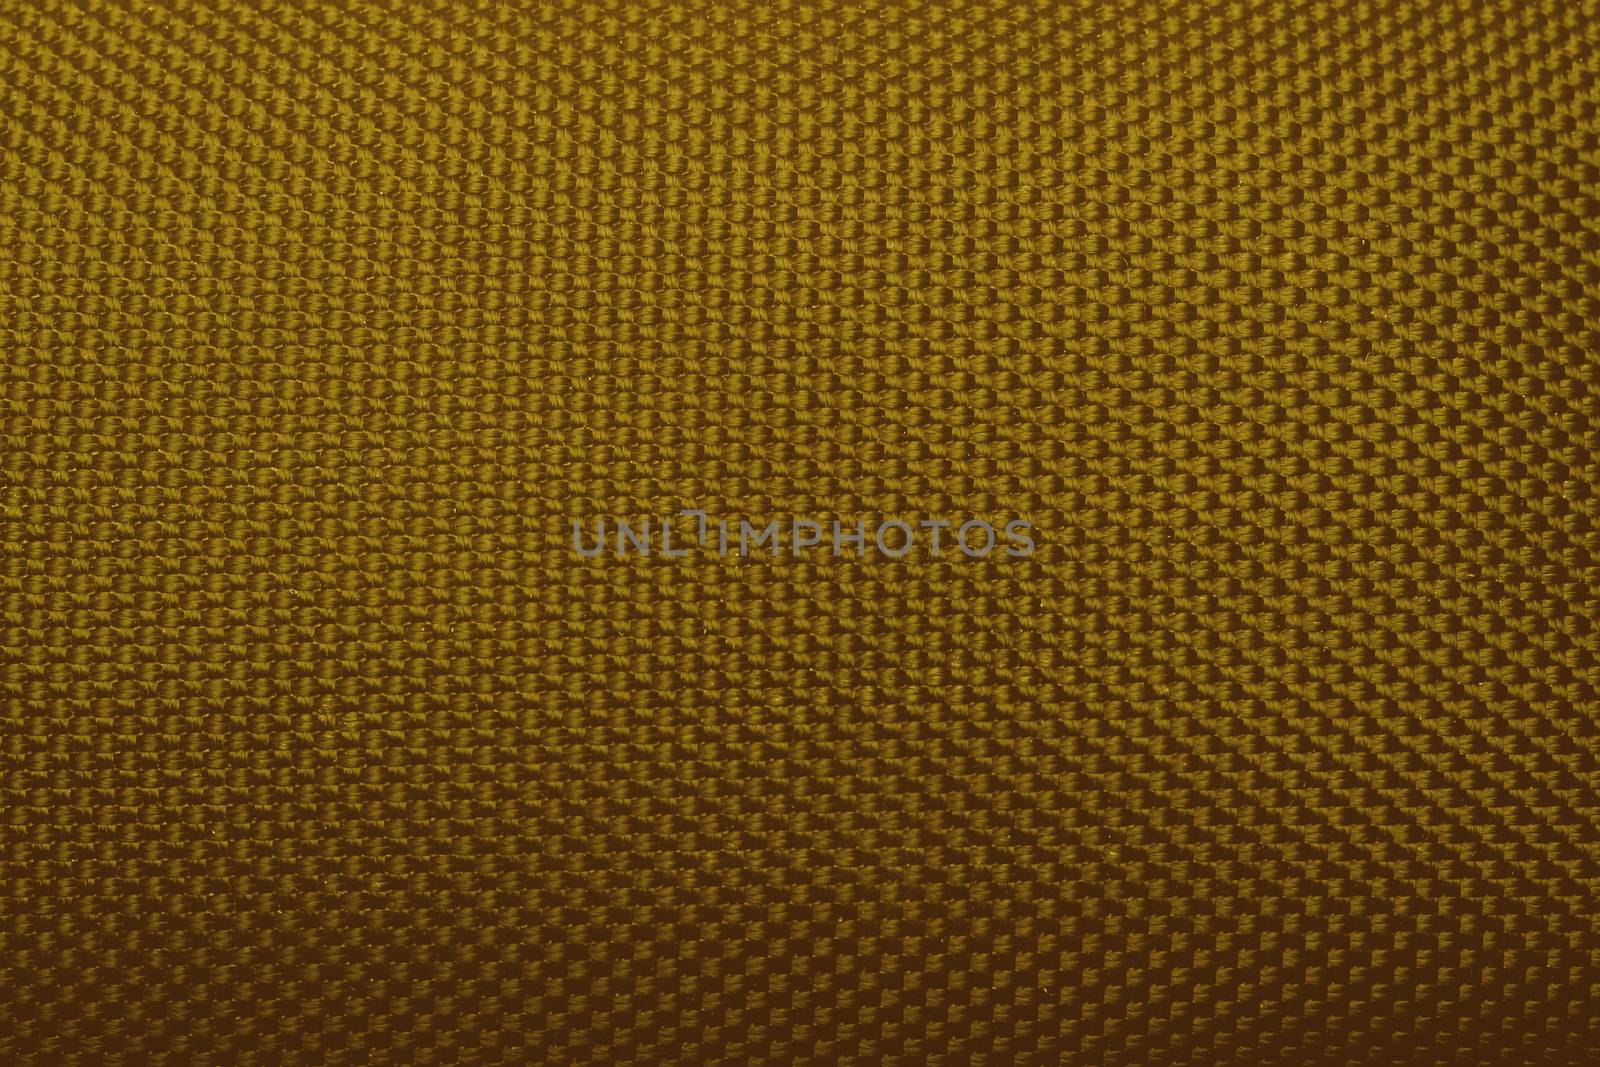 black fabric texture, abstract, texture, weave cover